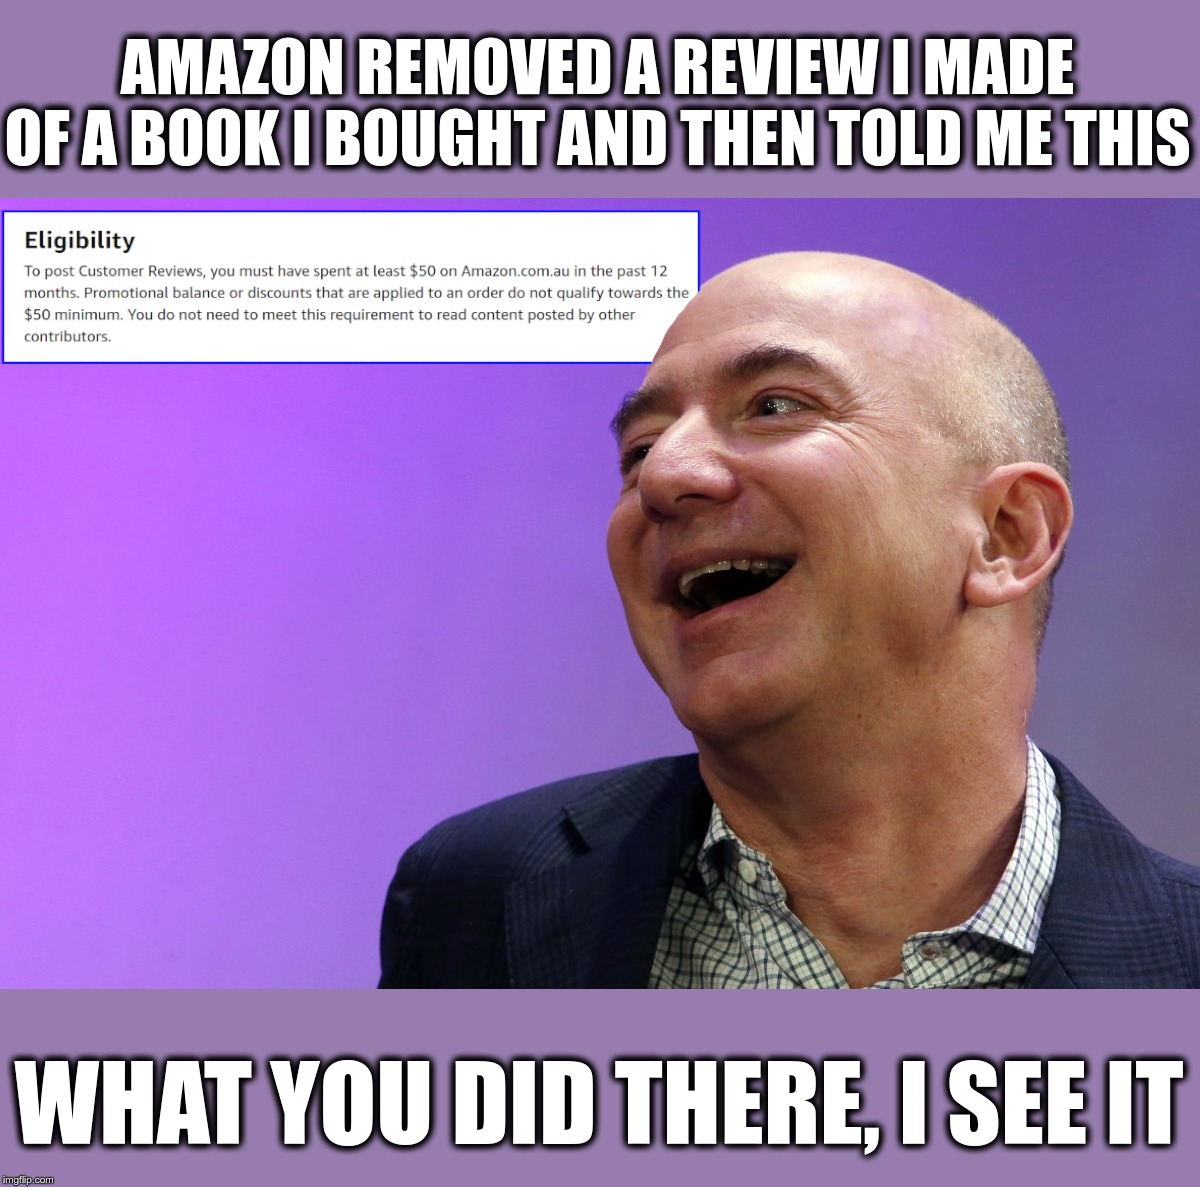 AMAZON REMOVED A REVIEW I MADE OF A BOOK I BOUGHT AND THEN TOLD ME THIS; WHAT YOU DID THERE, I SEE IT | made w/ Imgflip meme maker